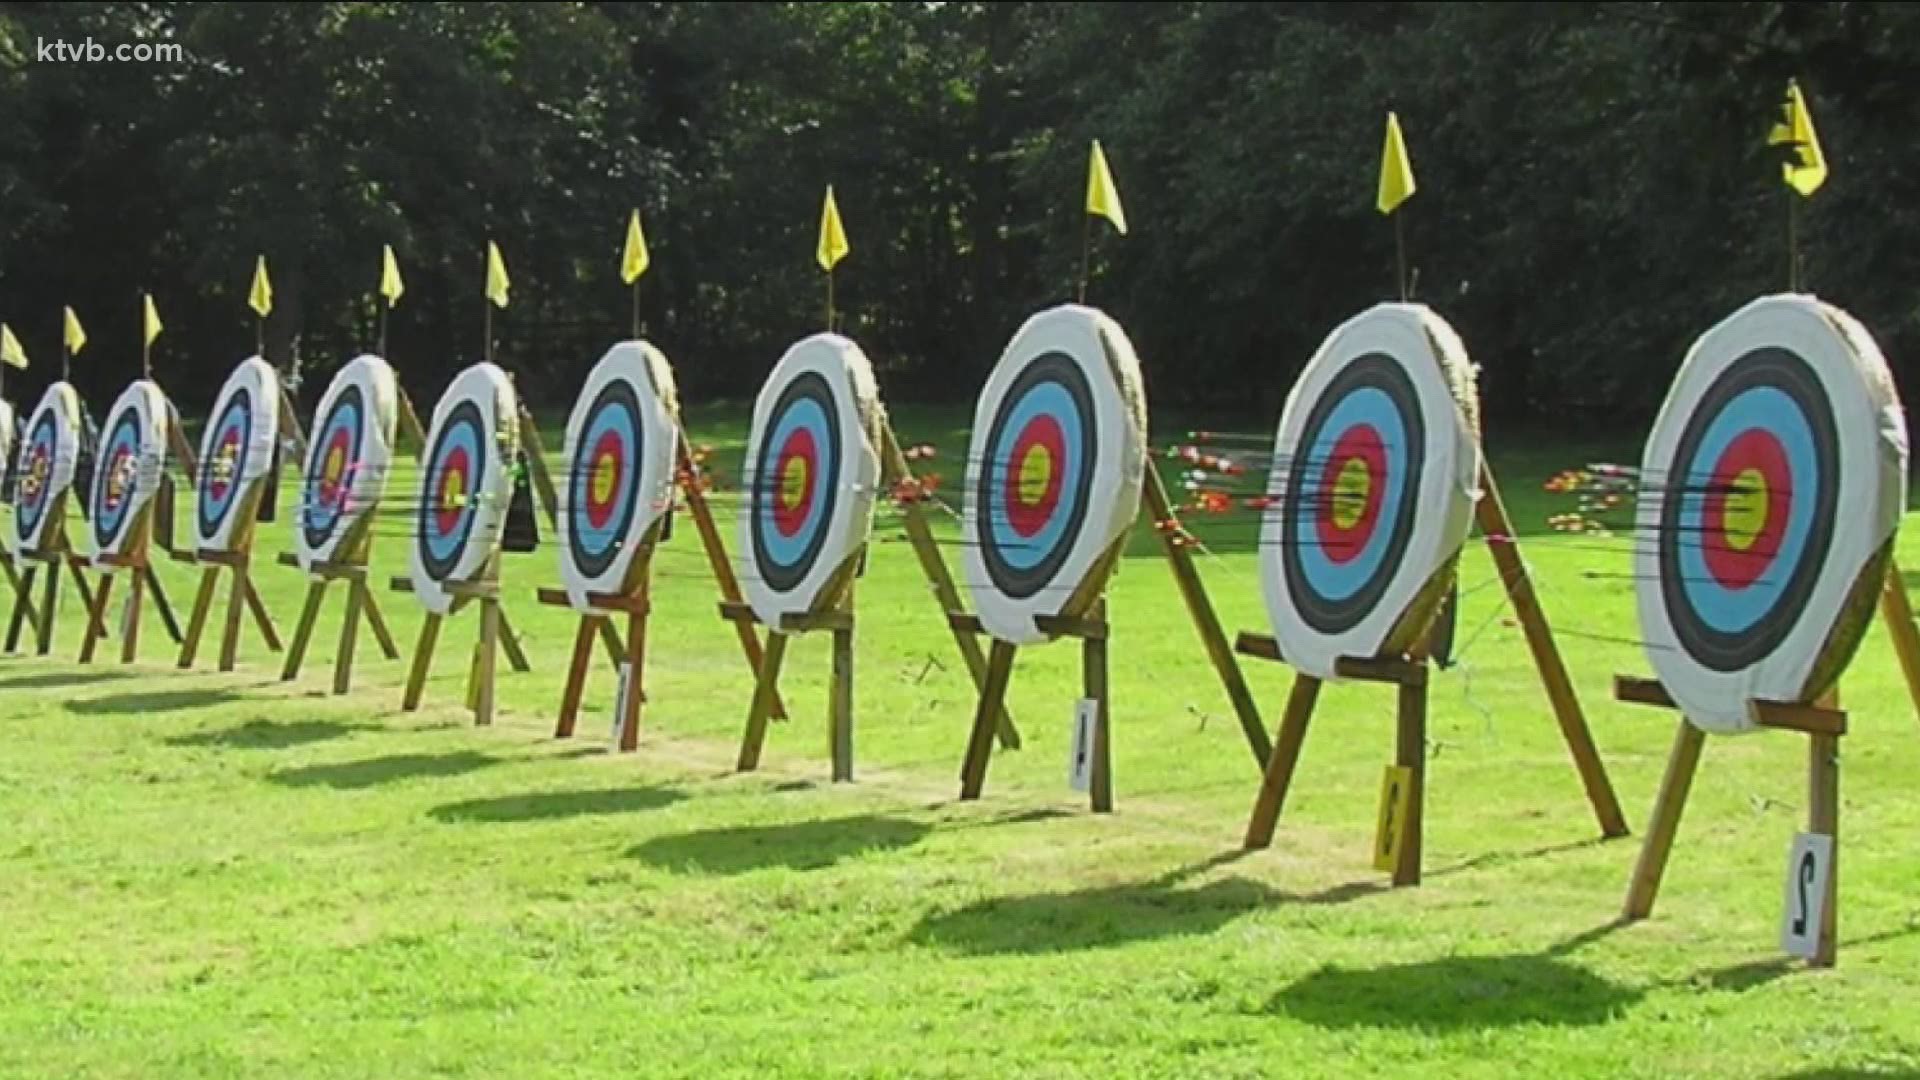 From archery lessons to cheerleading, Caldwell offers fun camps and activities for everyone.